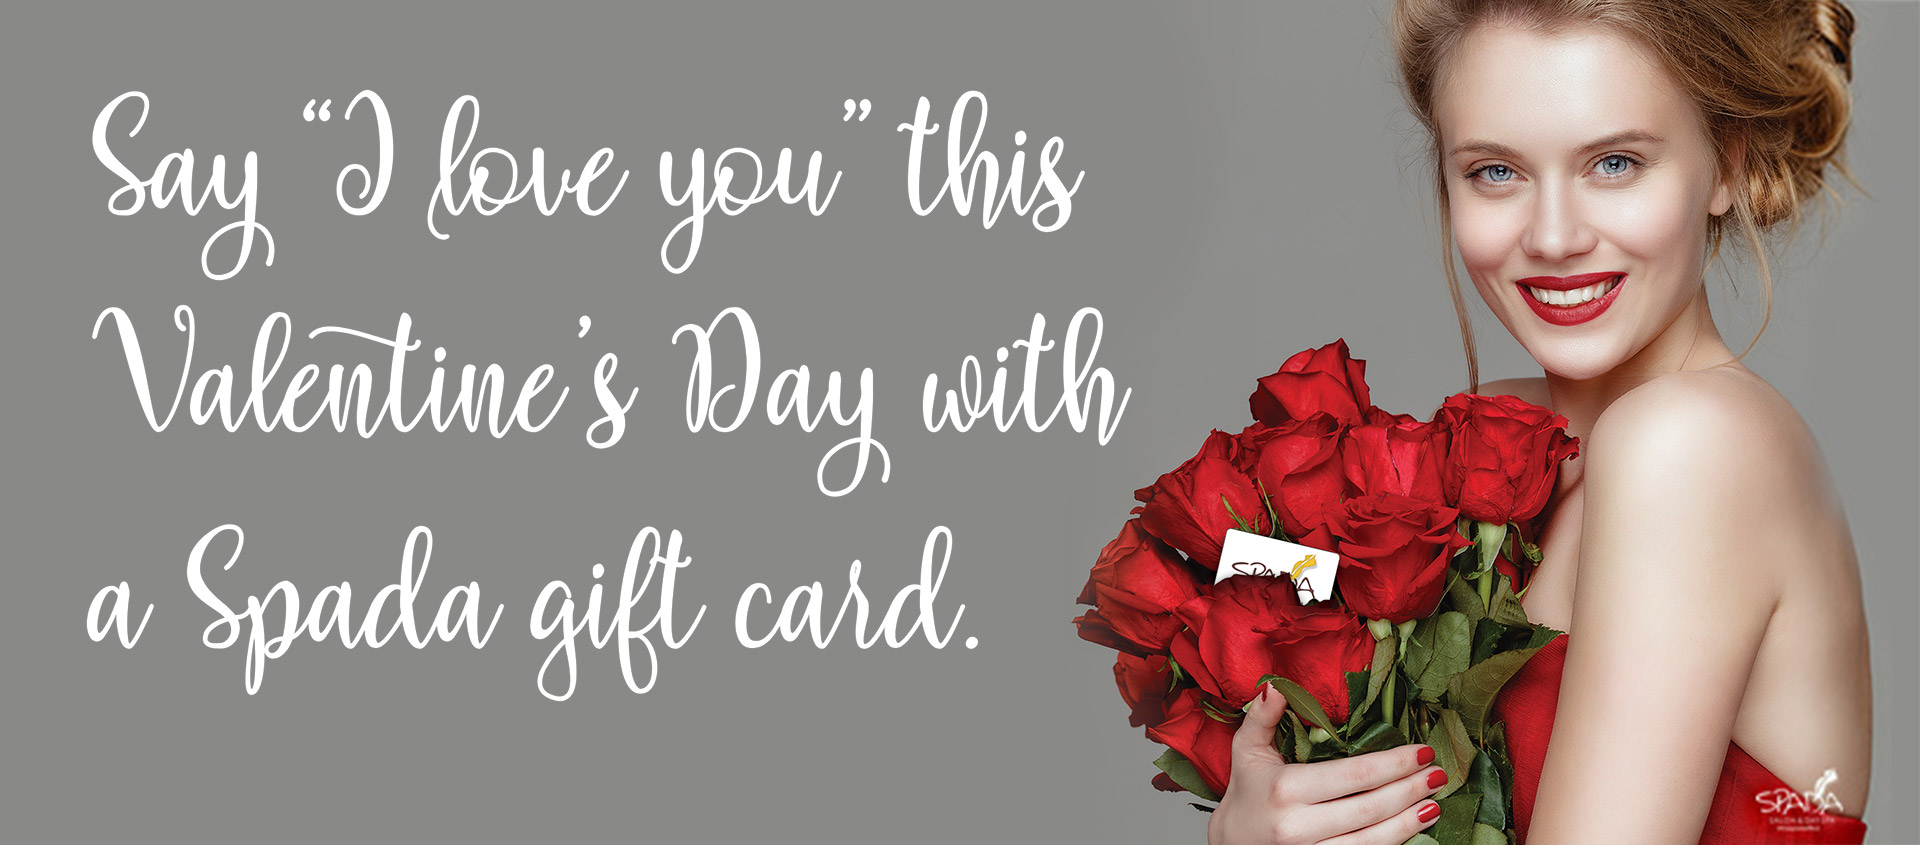 Roses are red. Violets are blue. But a Spada gift certificate says "I love you!"